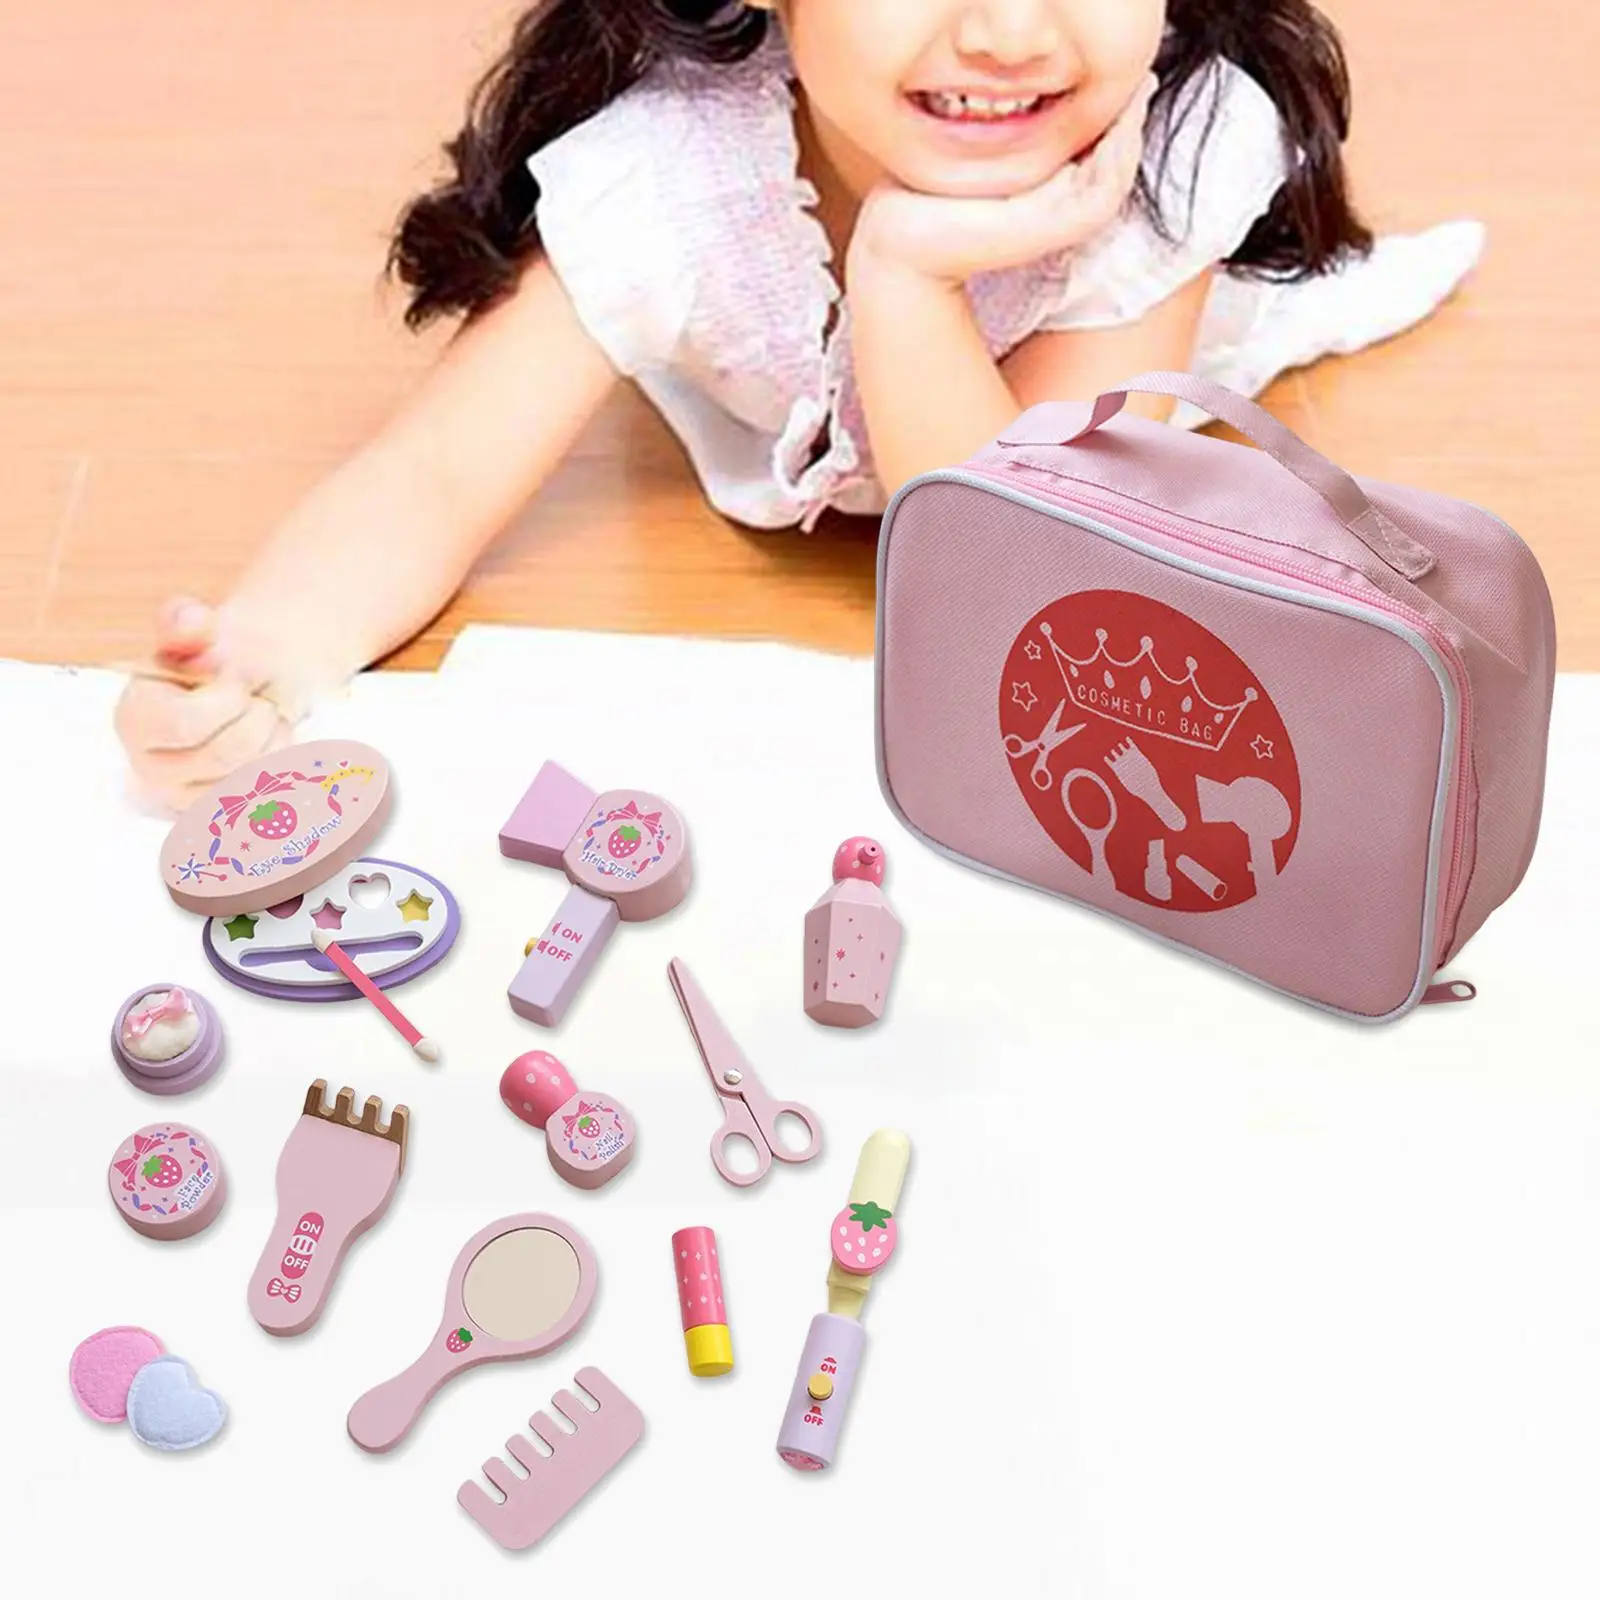 Makeup Kit Gifts with Cosmetic Bag Washable for Beginners Girls Toddler